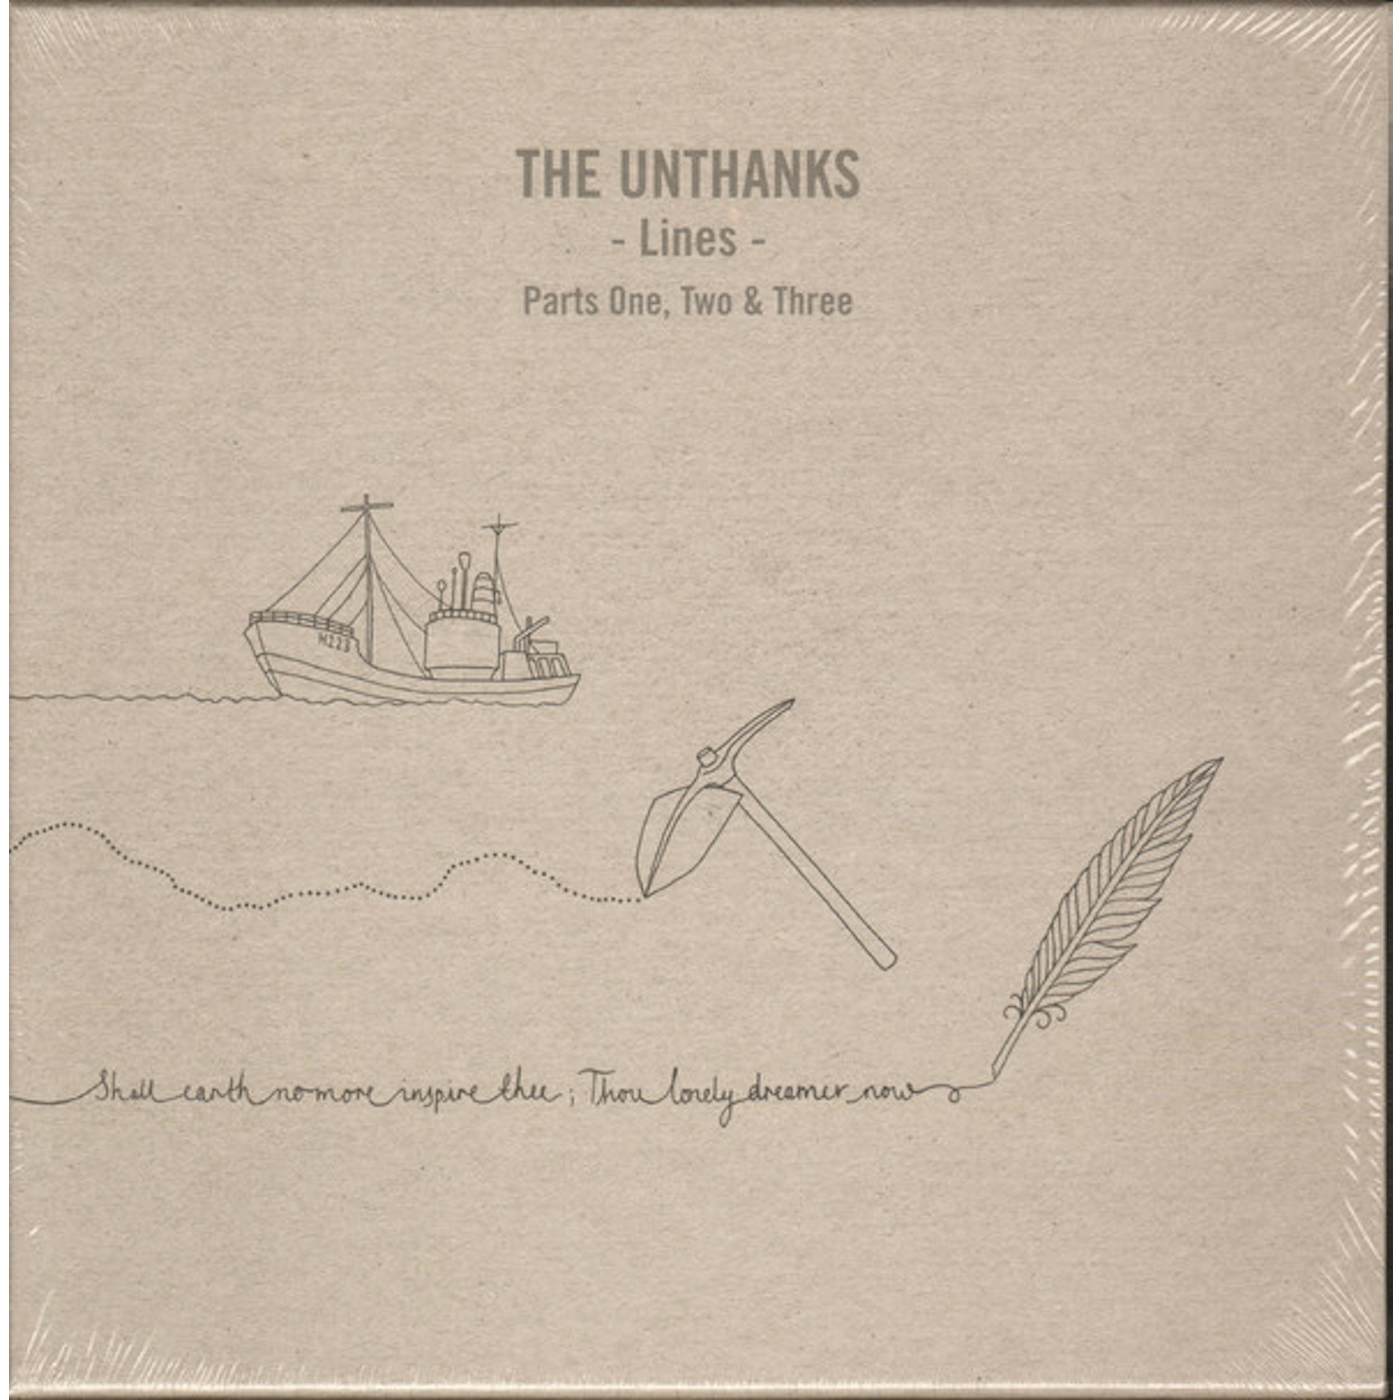 The Unthanks LINES - PARTS ONE, TWO & THREE Vinyl Record